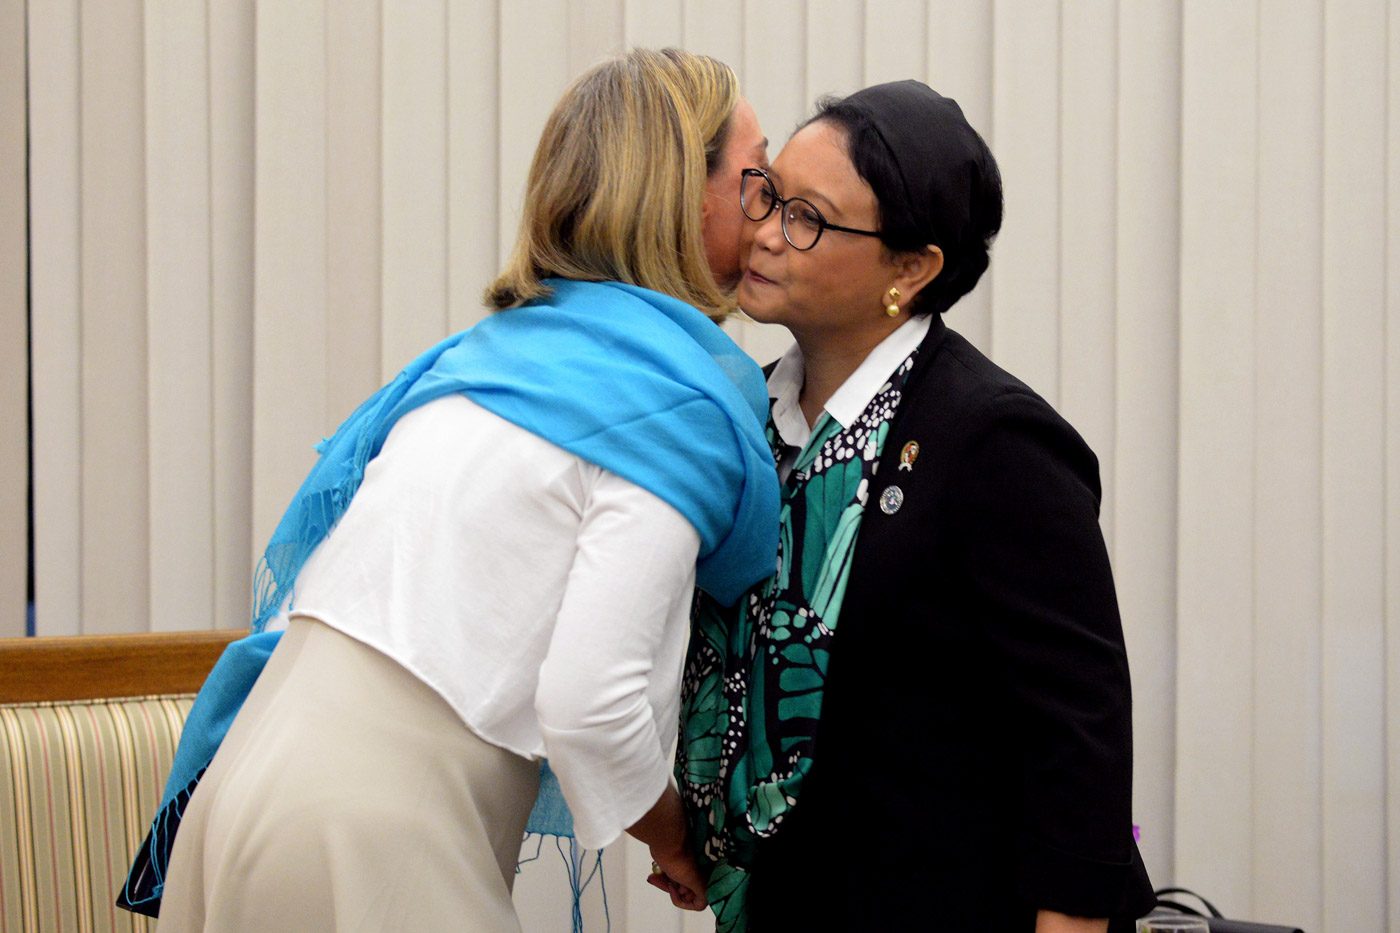 DIPLOMATIC COURTESY. EU High Representative Federica Mogherini (left) and Indonesian Foreign Minister Retno Marsudi (right) greet each other during an ASEAN-related meeting on August 7, 2017. Photo by Angie de Silva/Rappler  